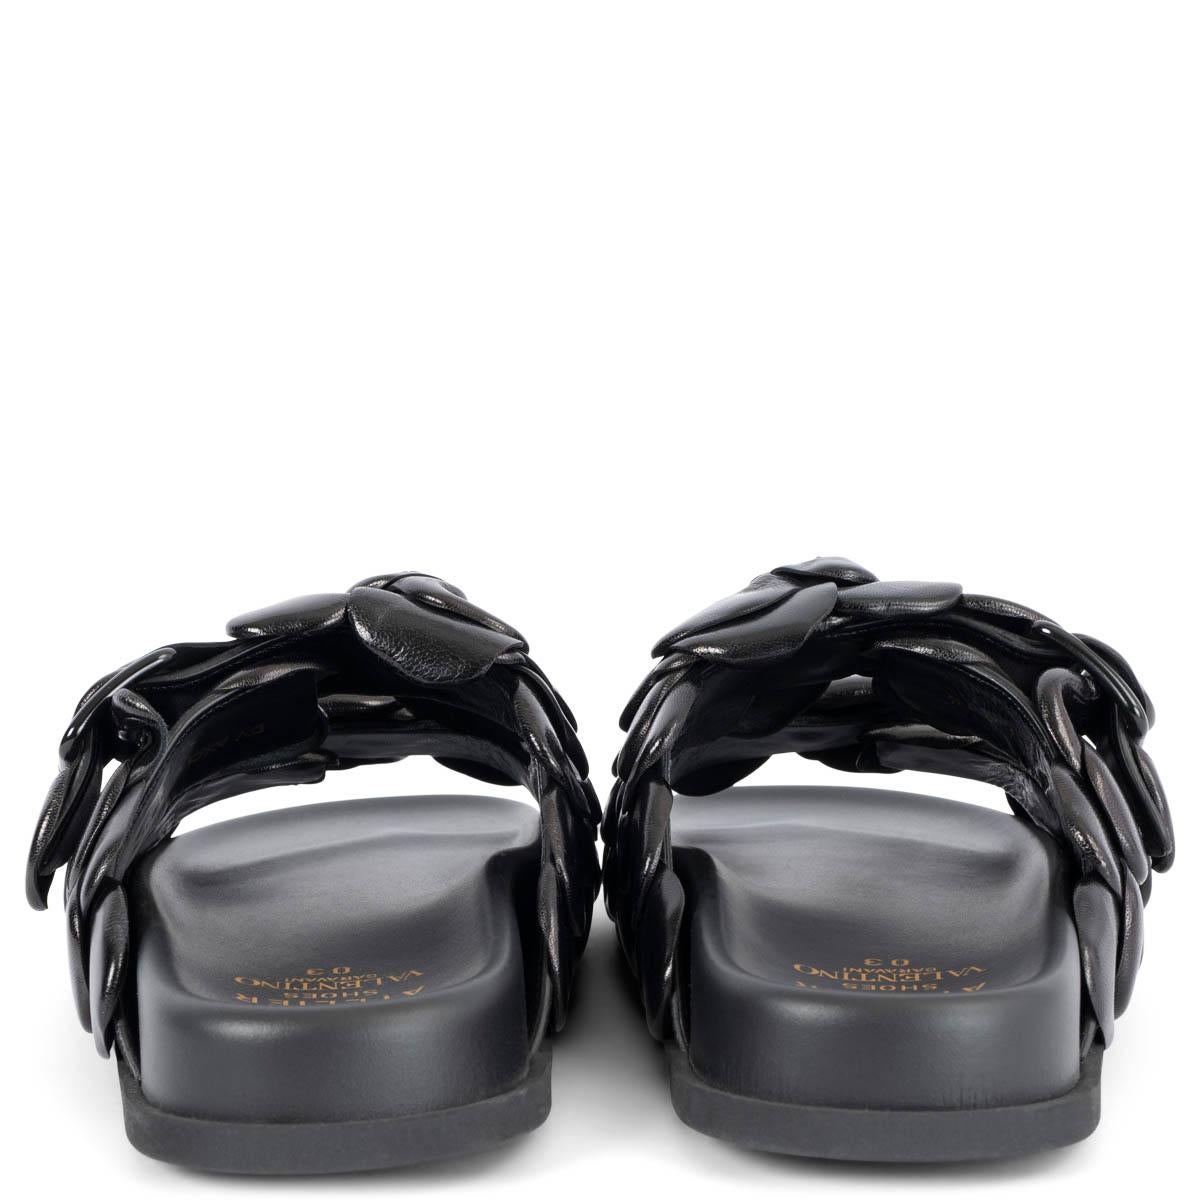 VALENTINO black leather 03 ROSE EDITION ATELIER Slides Sandals Shoes 38.5 In New Condition For Sale In Zürich, CH